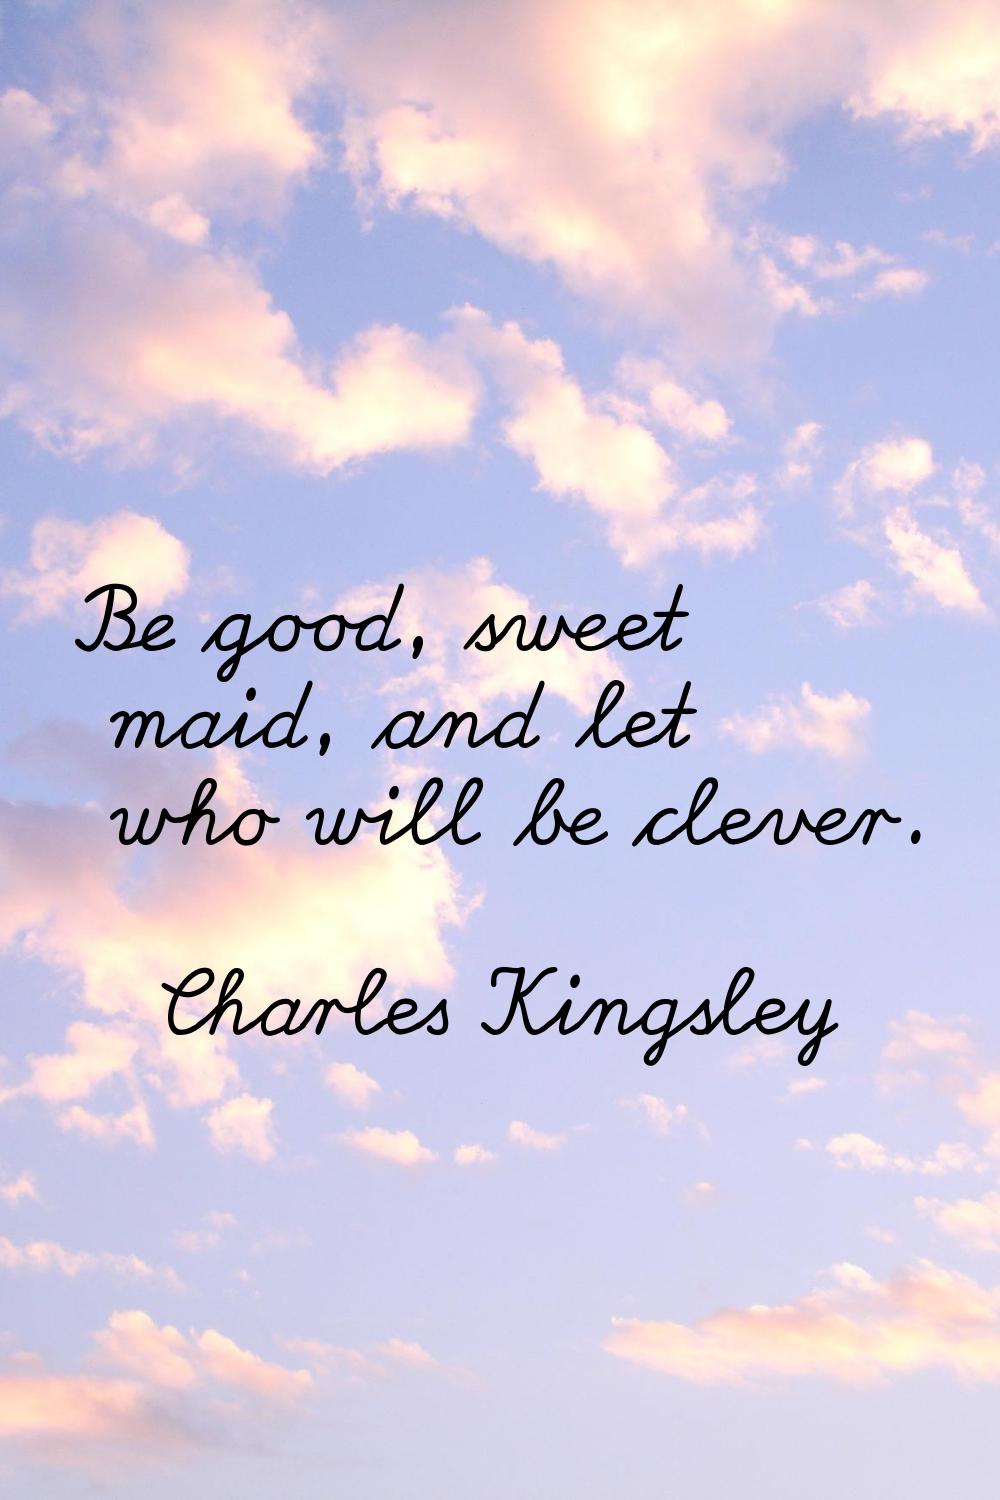 Be good, sweet maid, and let who will be clever.